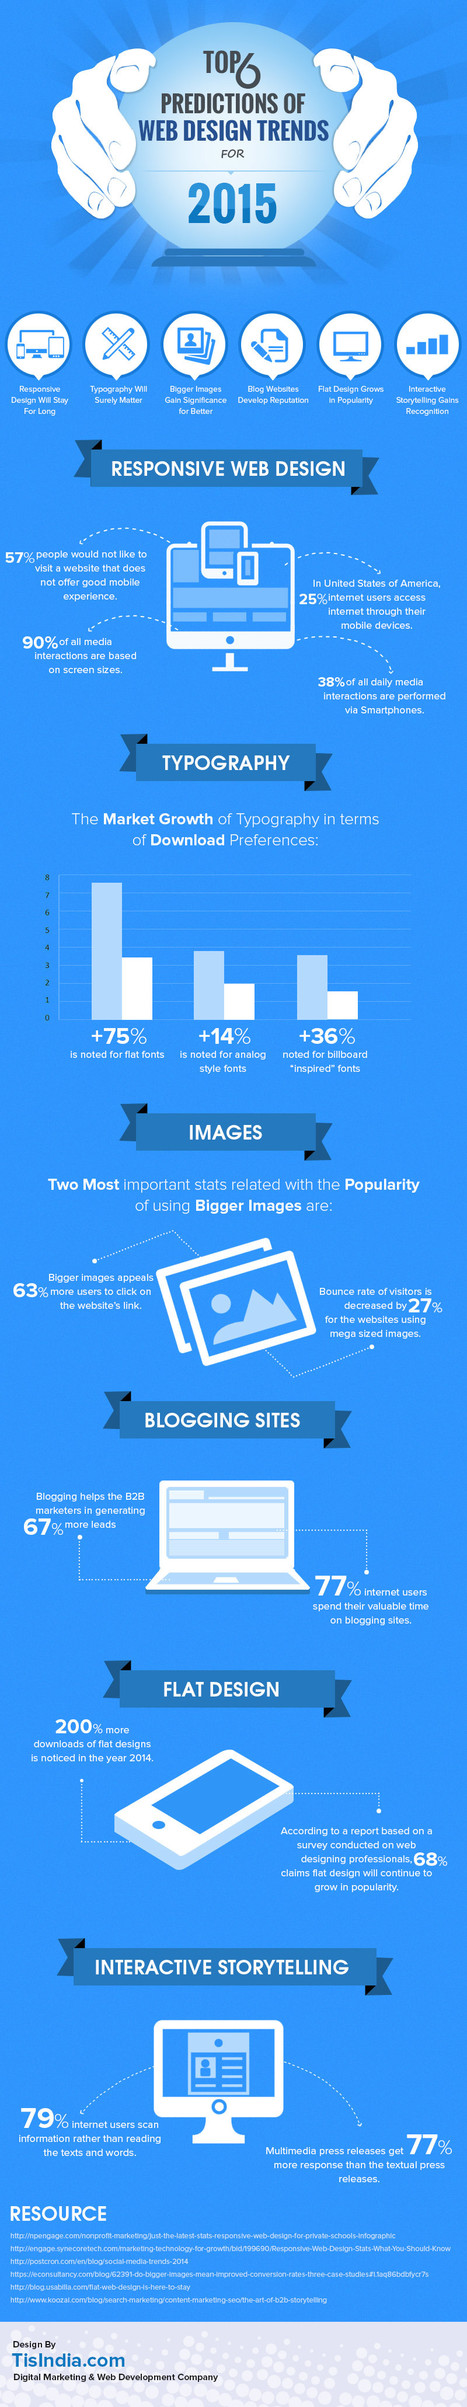 Web Design Trends 2015 [Infographic] | E-Learning-Inclusivo (Mashup) | Scoop.it